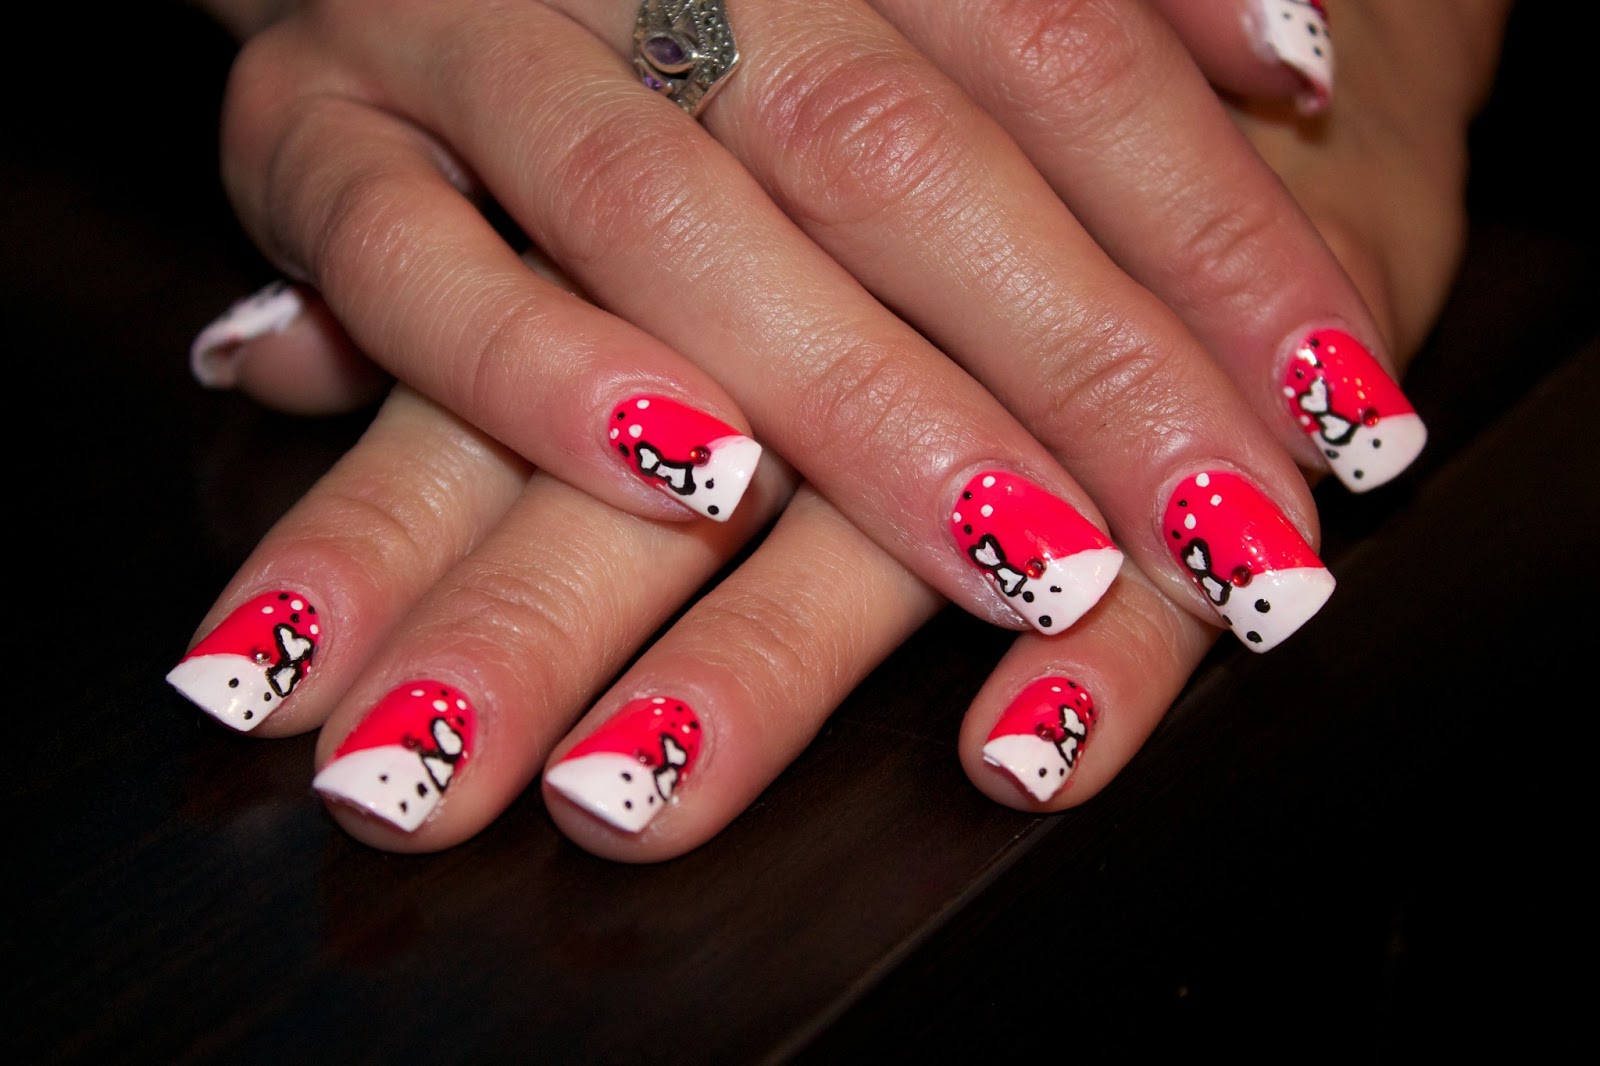 10. Edgy Valentine's Day Nail Art Designs - wide 2